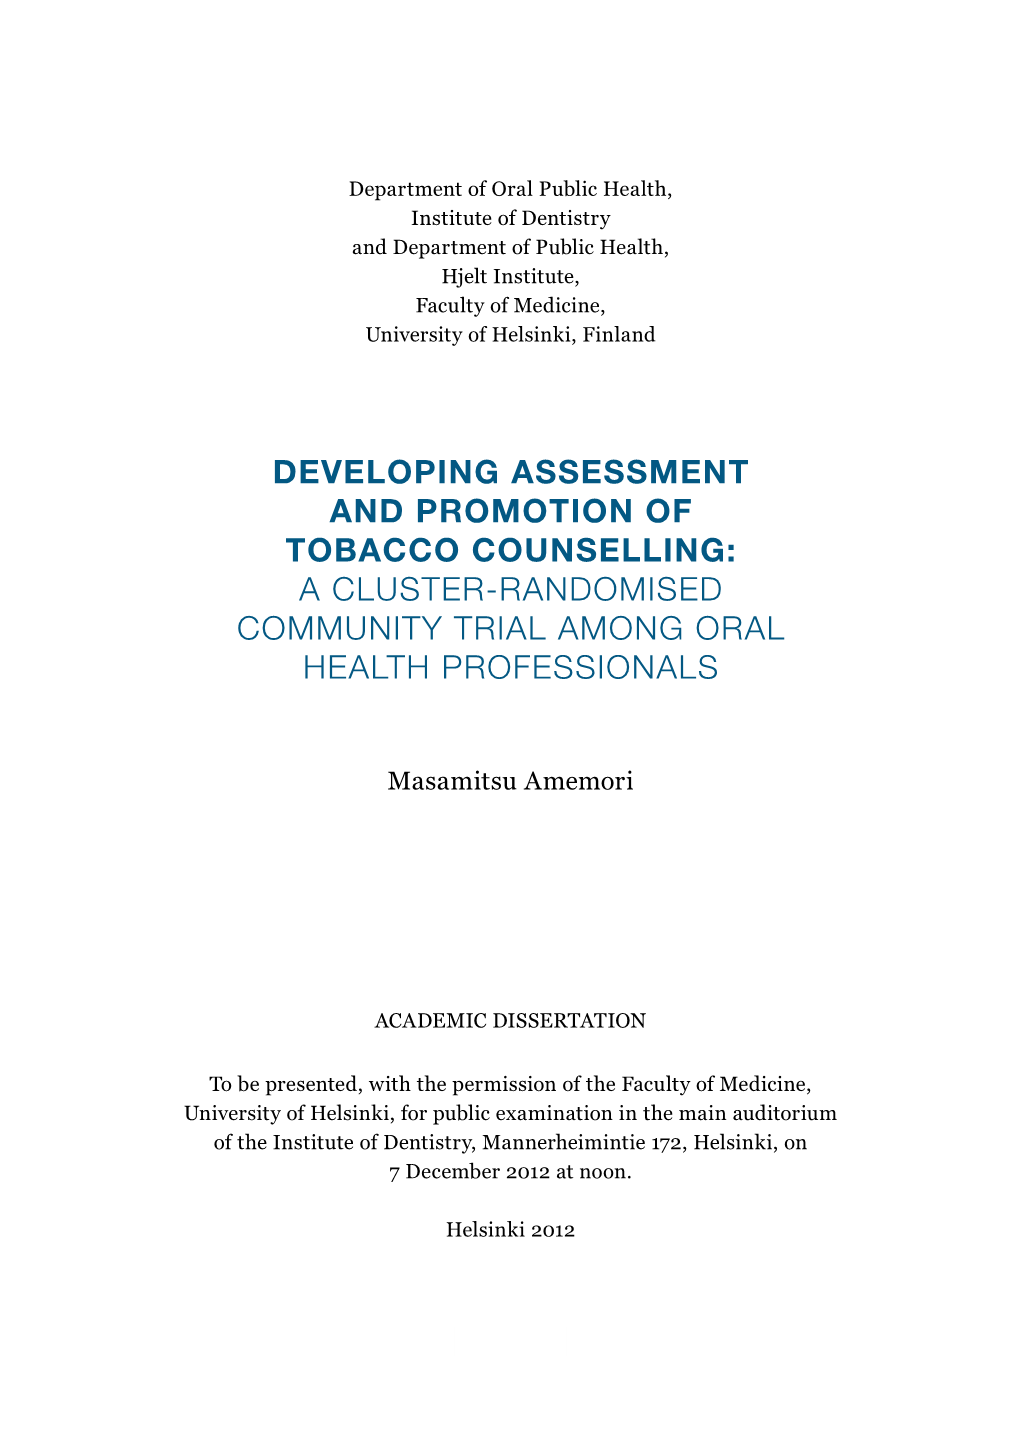 Developing Assessment and Promotion of Tobacco Counselling : a Cluster-Randomised Community Trial Among Oral Health Professional